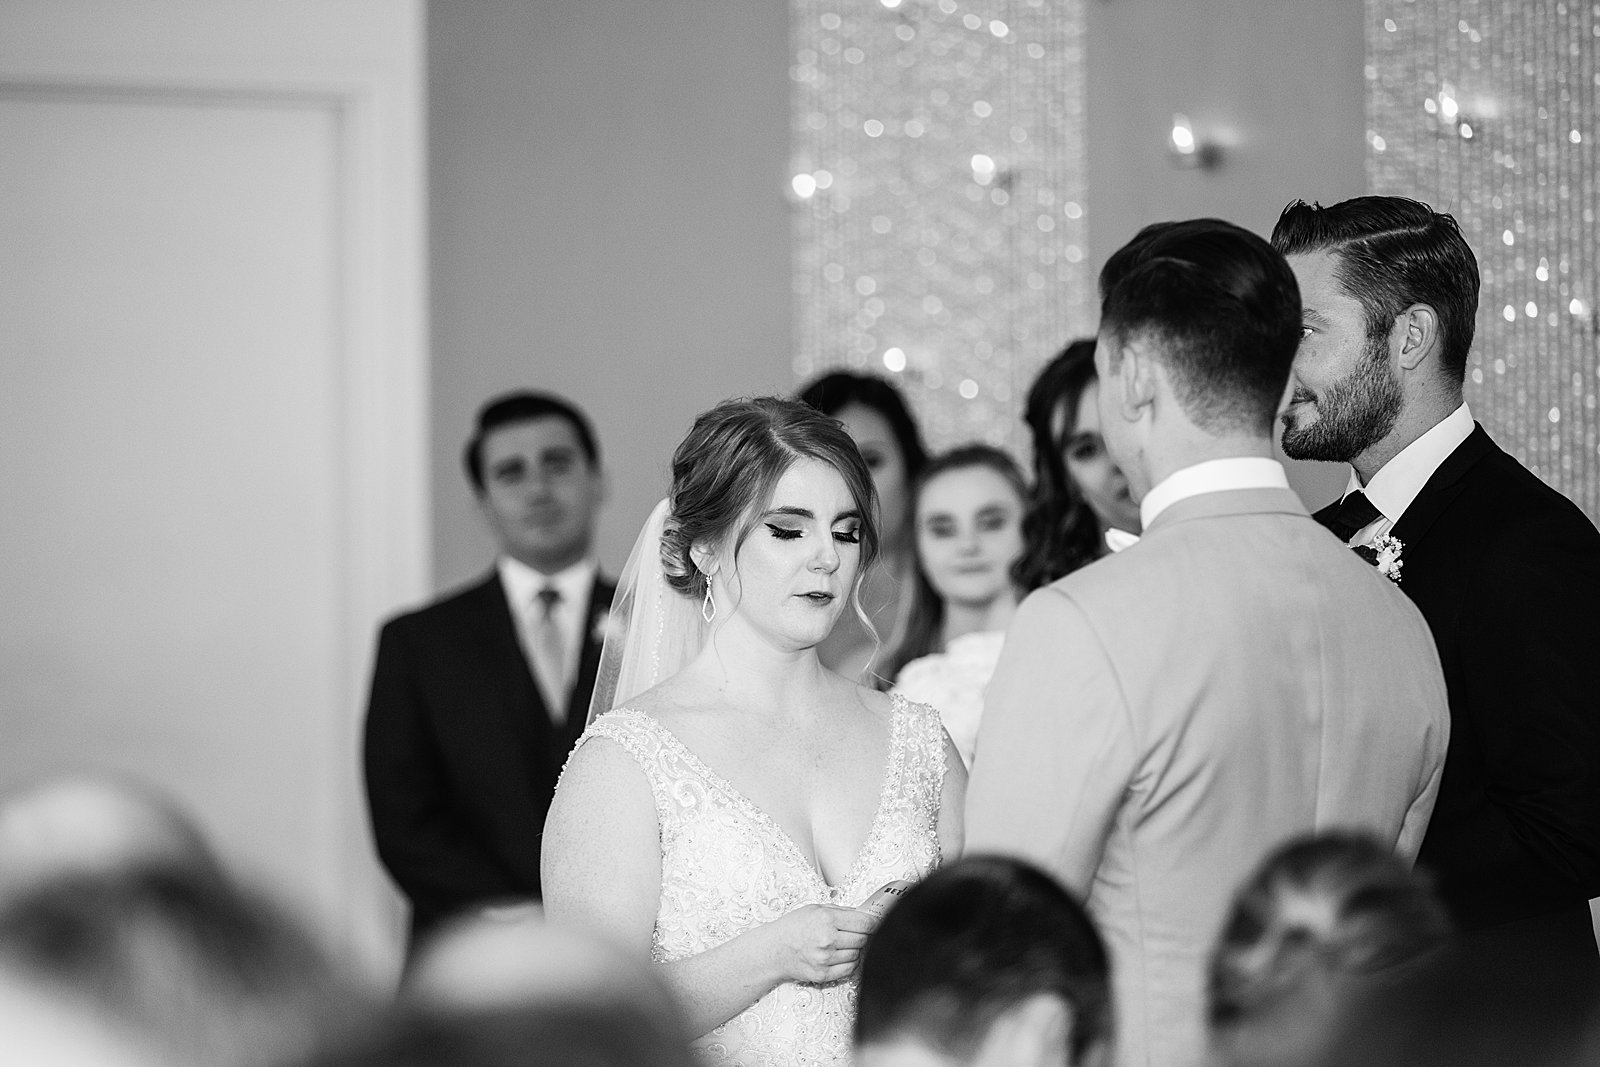 Bride looking at her groom during their wedding ceremony at SoHo63 by Chandler wedding photographer PMA Photography.